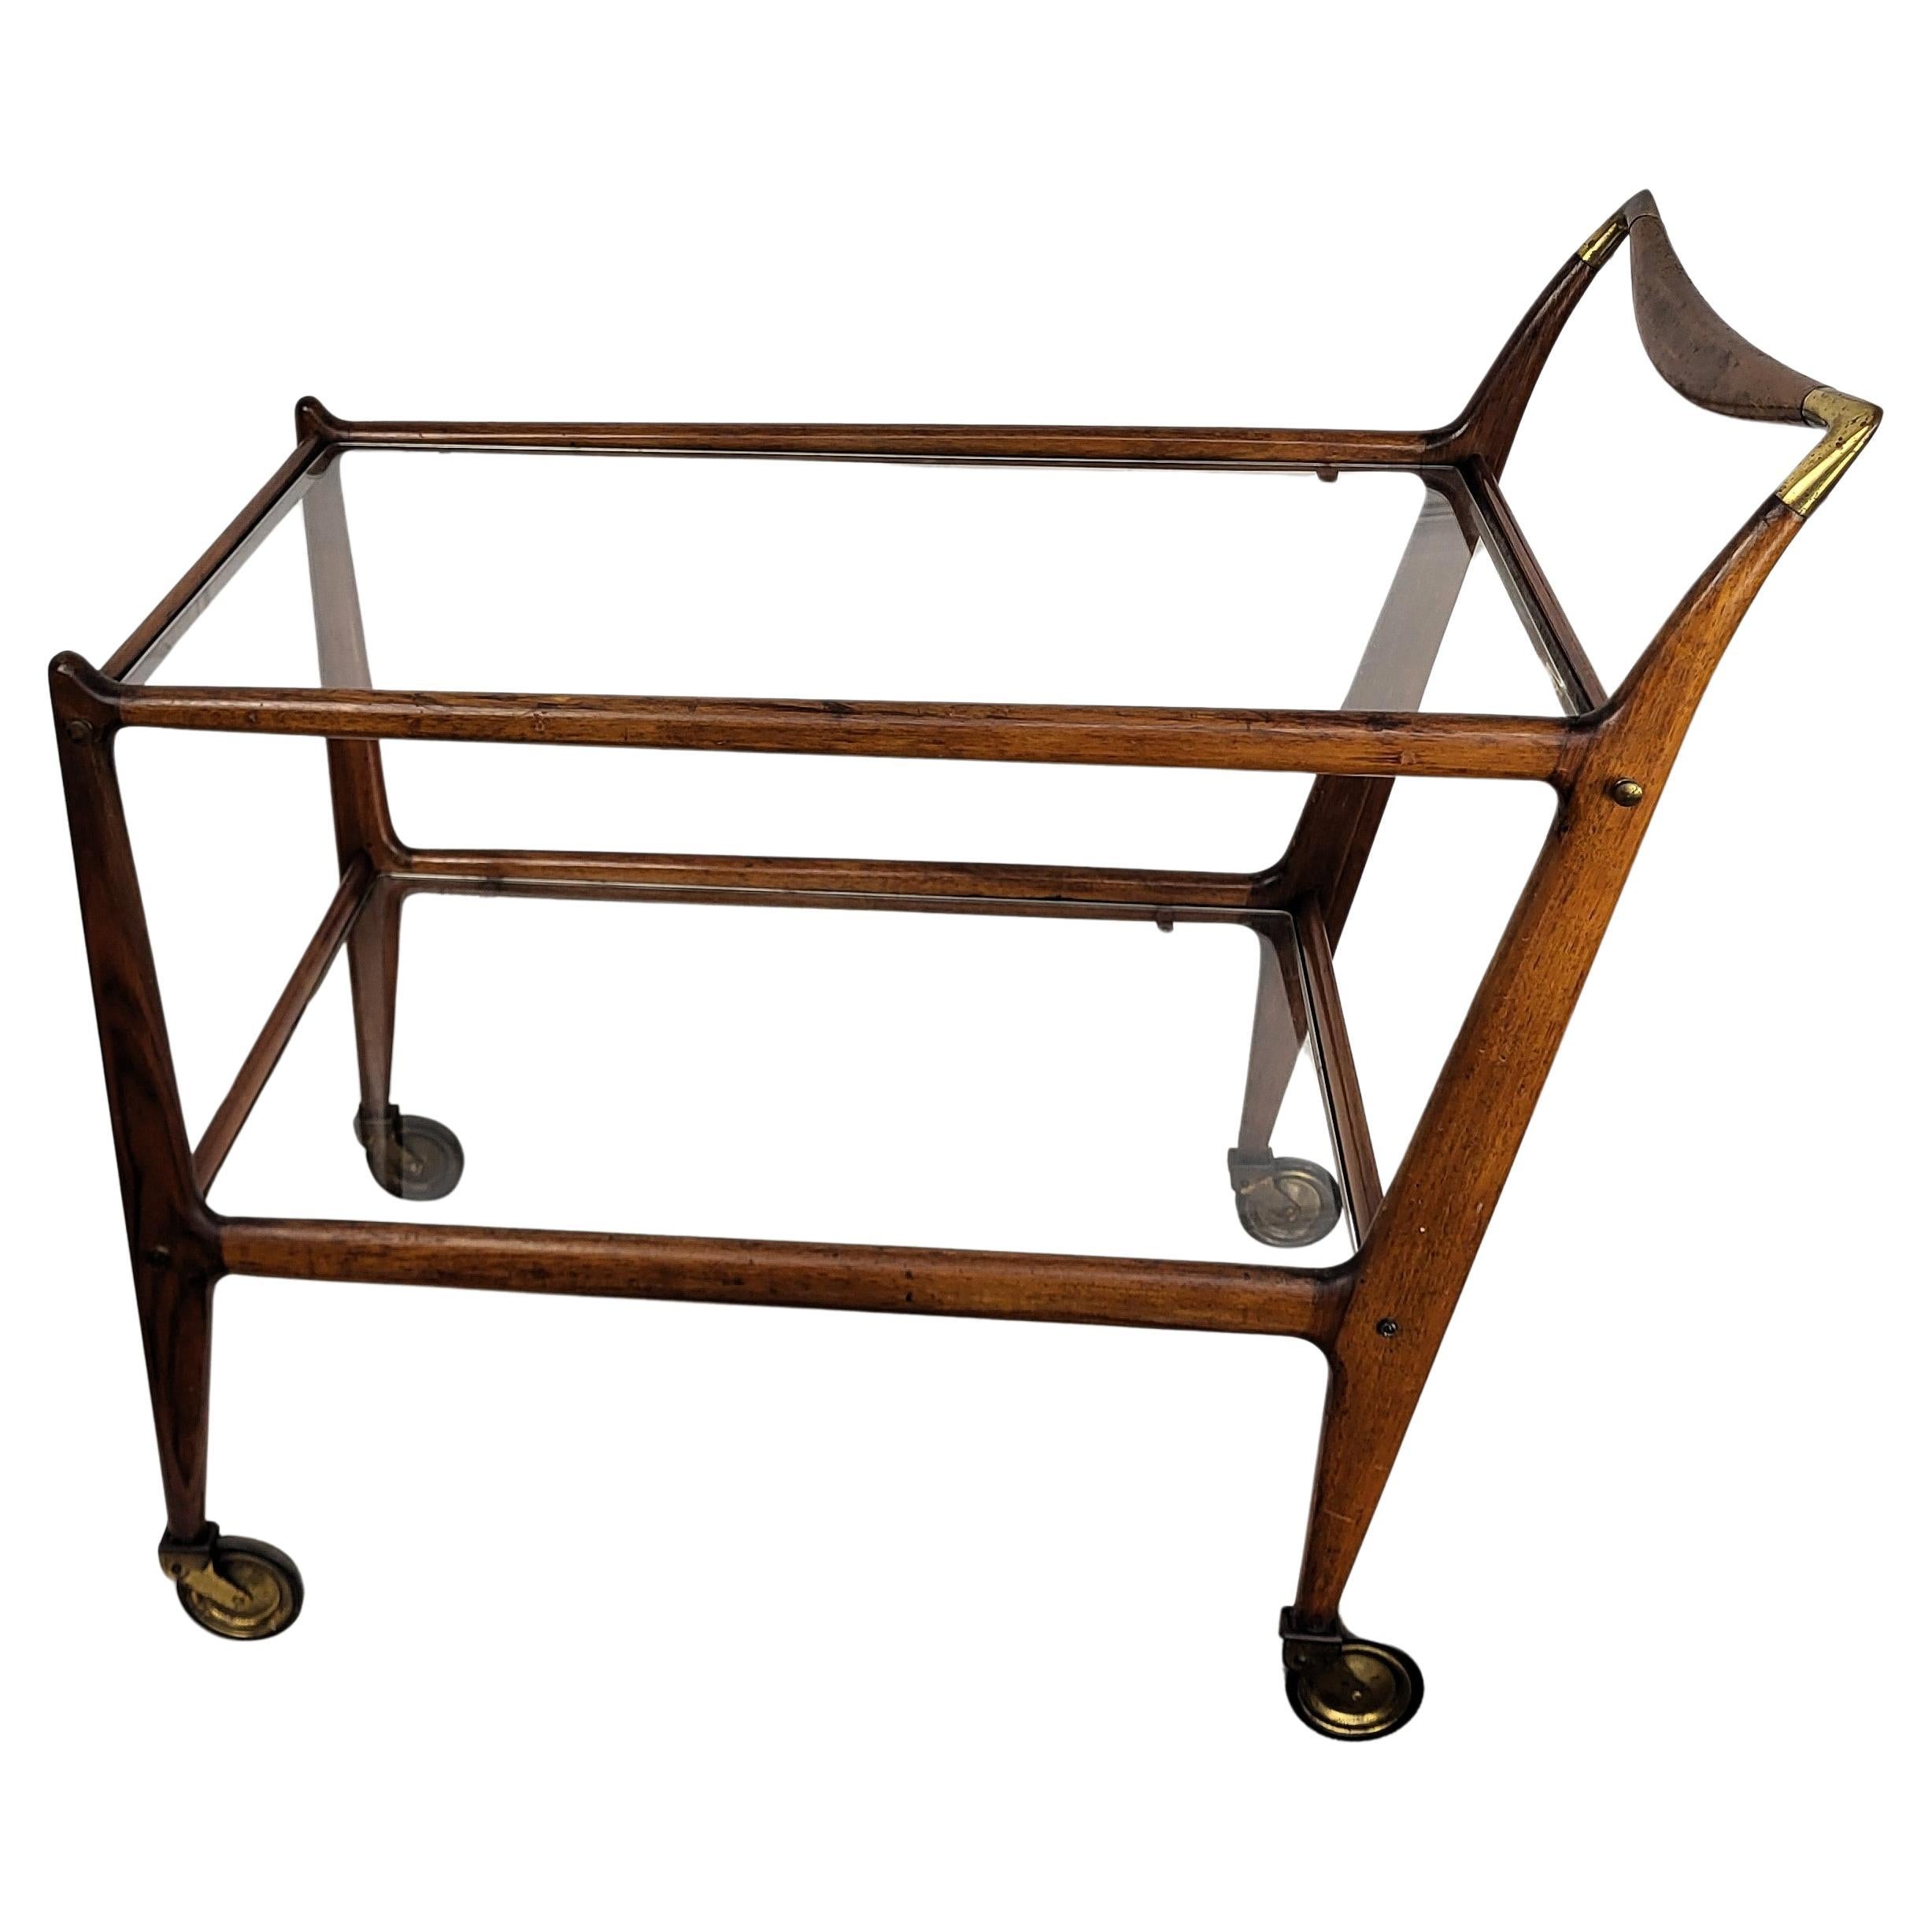 1950s Italian Ico Parisi for De Baggis Number 58 Wood Brass Glass Dry Bar Cart For Sale